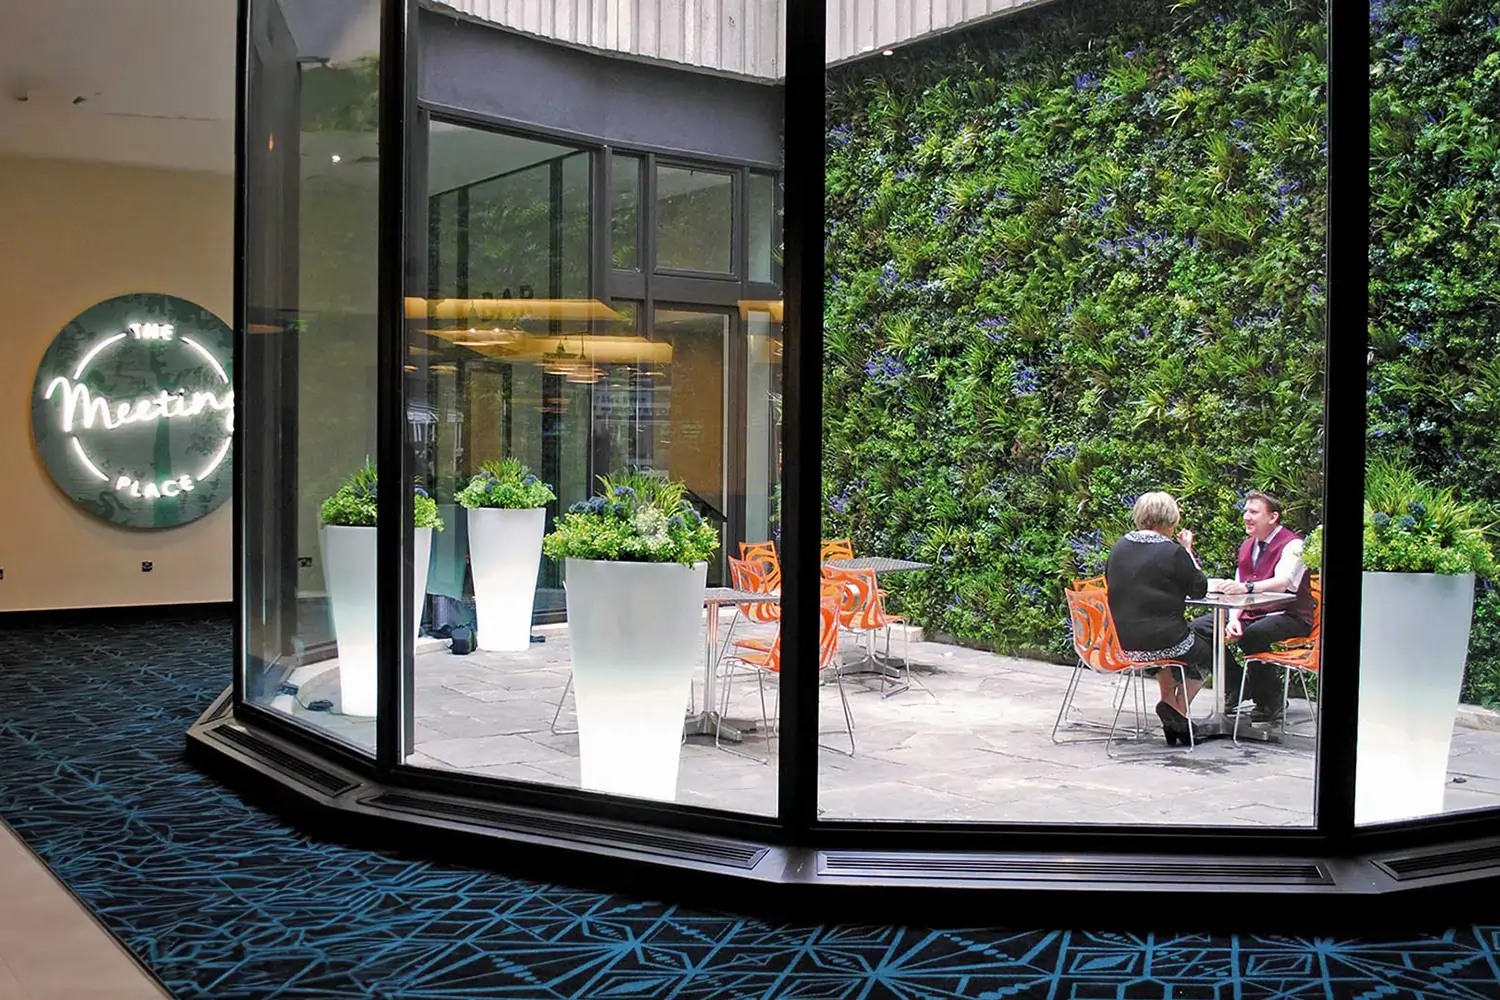 Artificial living wall in restaurant from SYNLawn